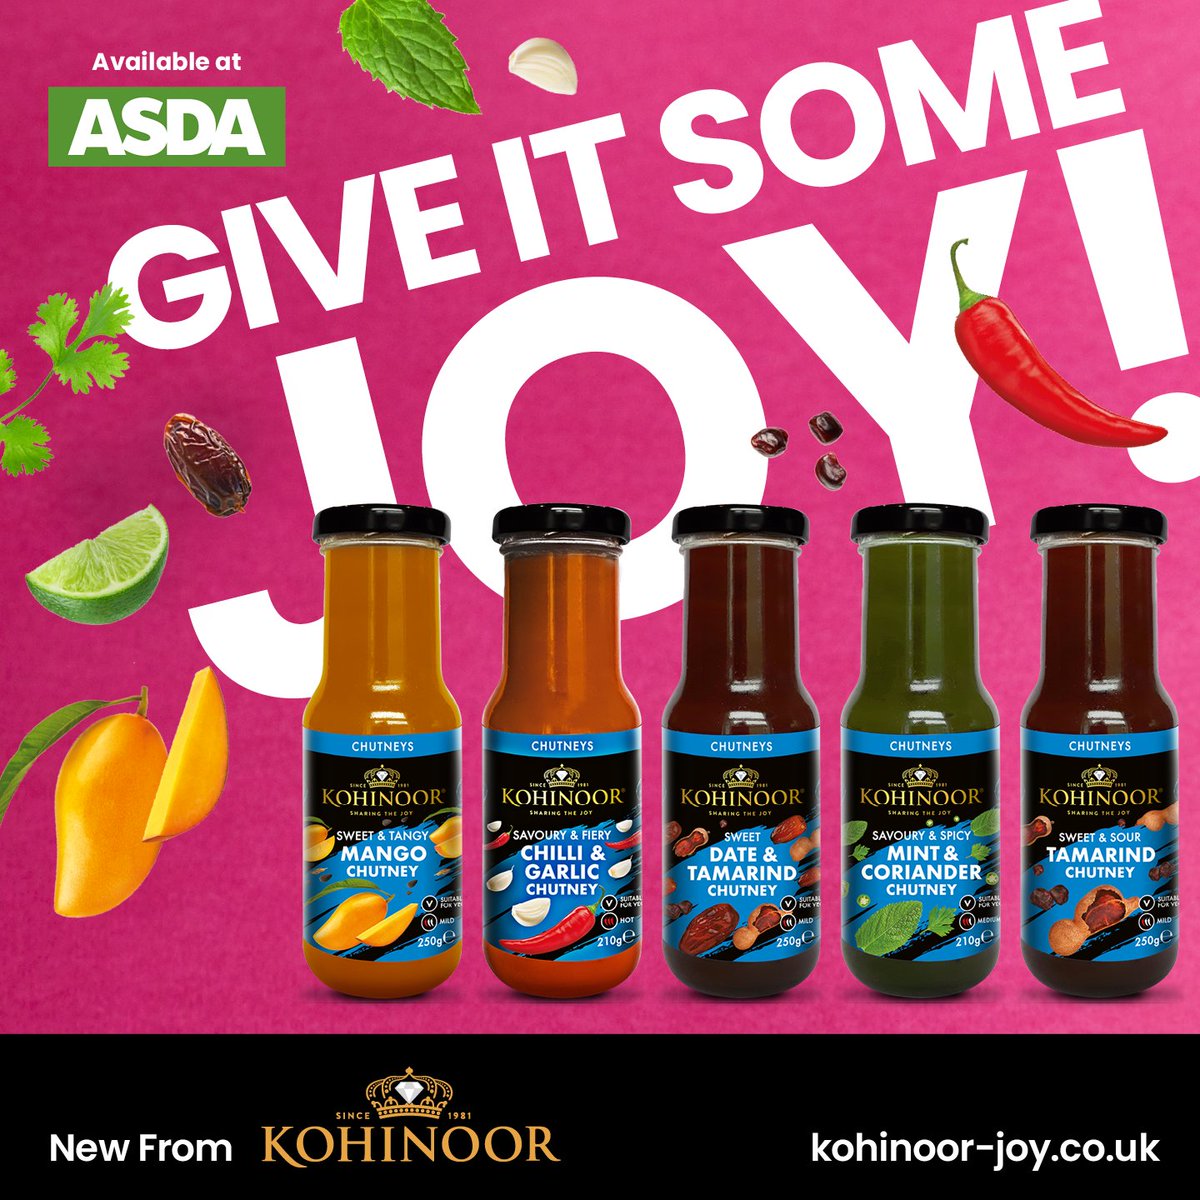 Our New Authentic Pouring Chutneys are smooth and versatile, making them perfect for any meal! Check out the link to our Asda page rb.gy/sx9gc4